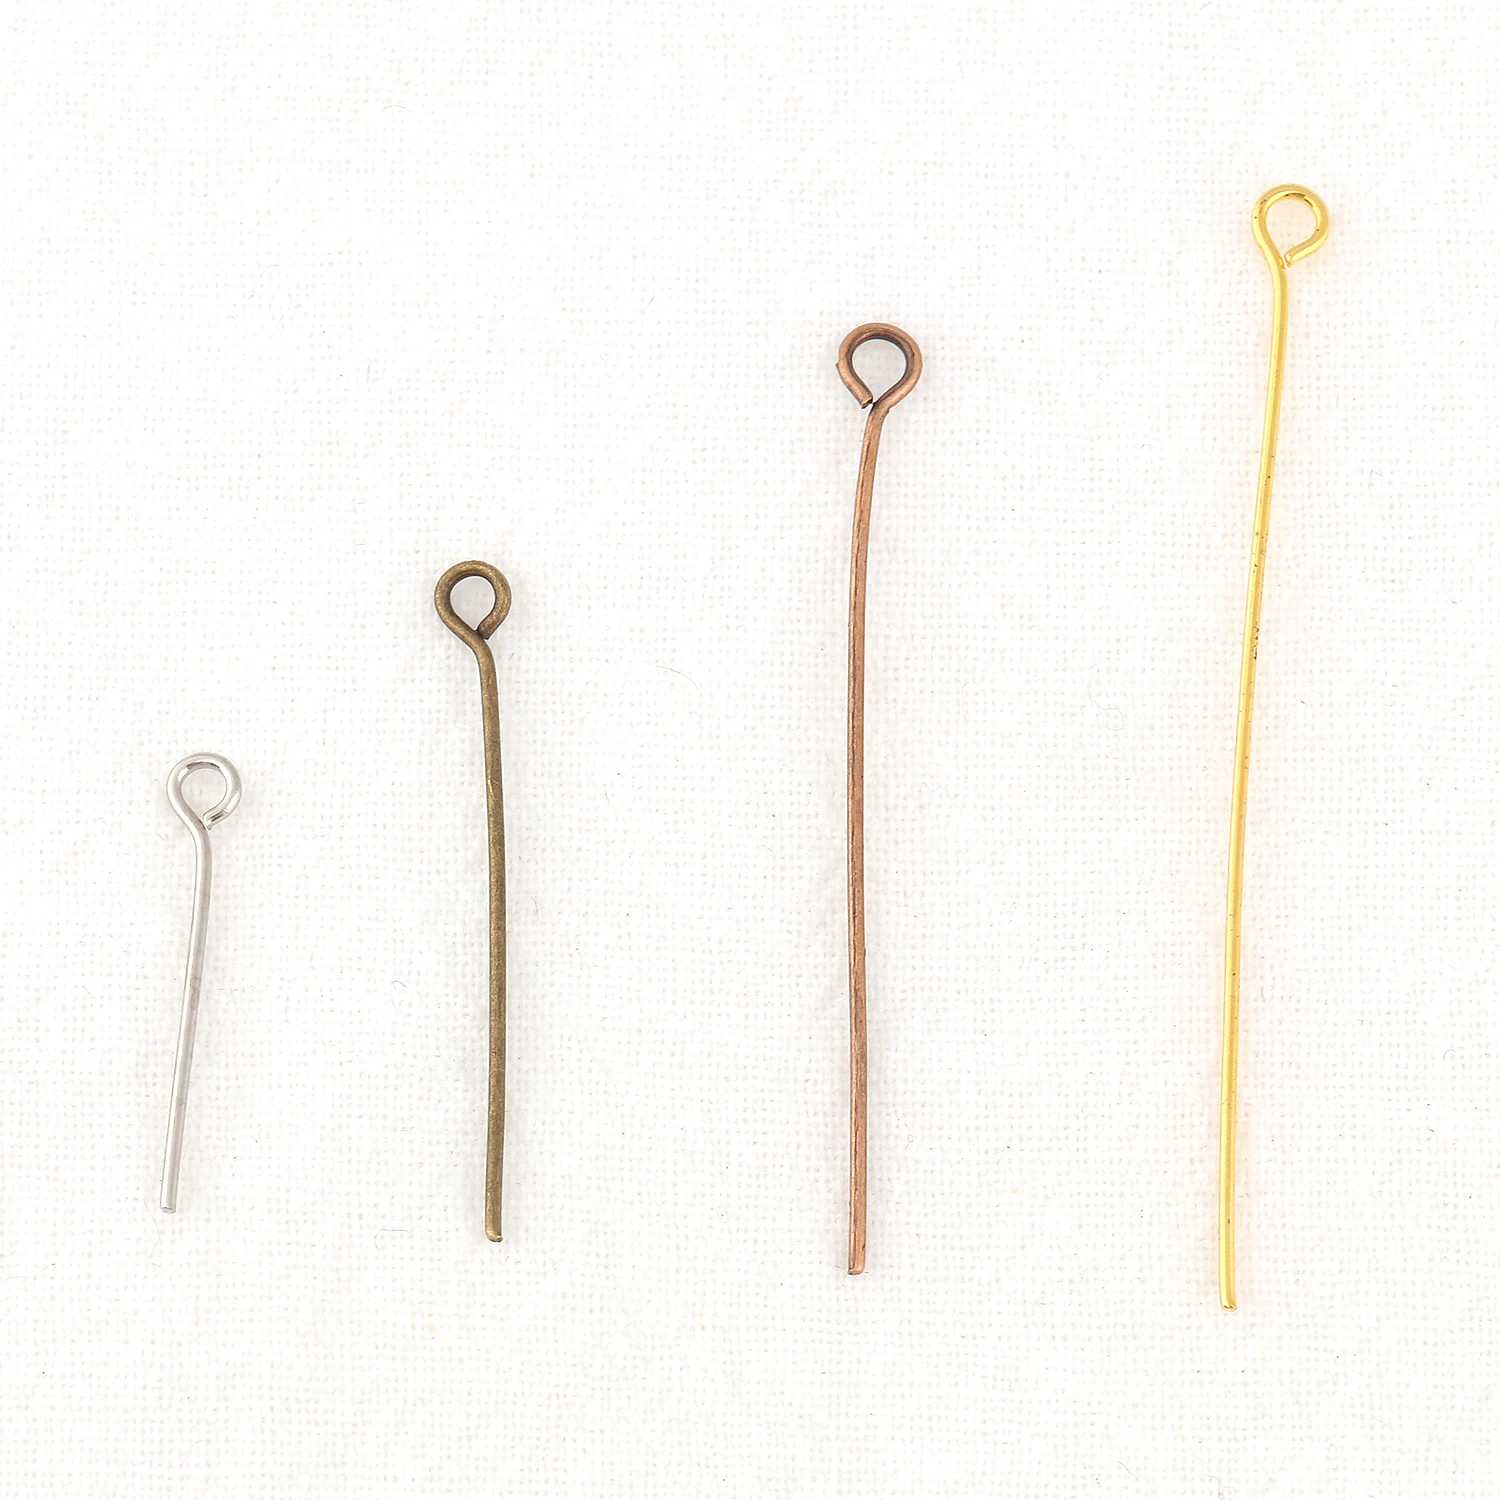 200 Pieces Head Pins for Jewelry Making Jewelry Head Pins 16mm